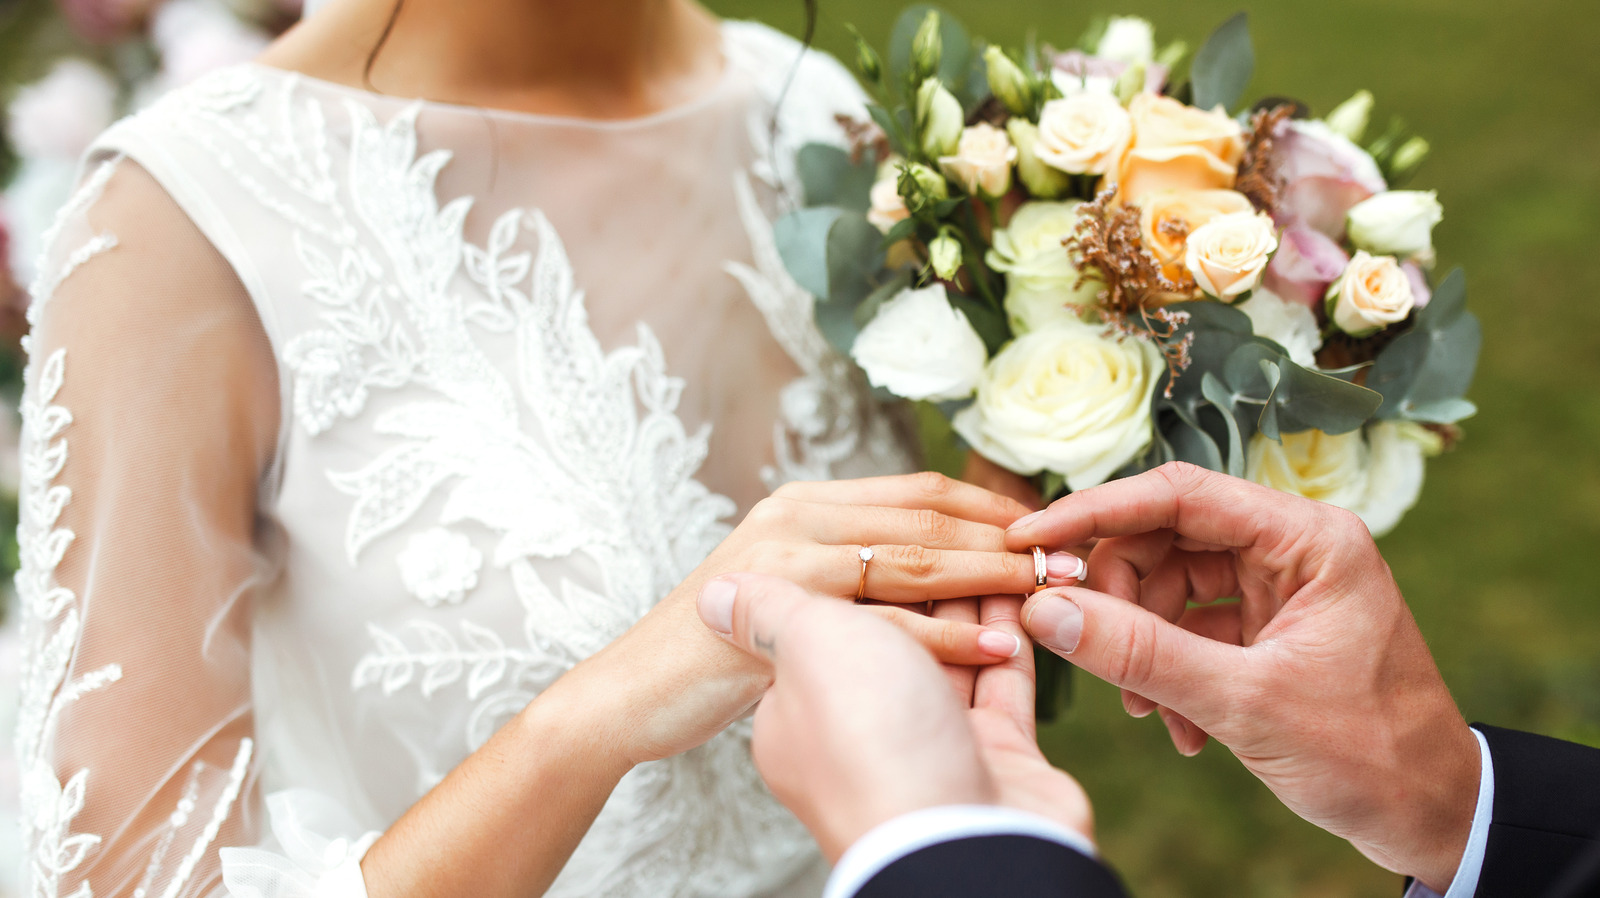 A man putting a ring on a girl's hand in a weading dress and holding a bouquet of flowers